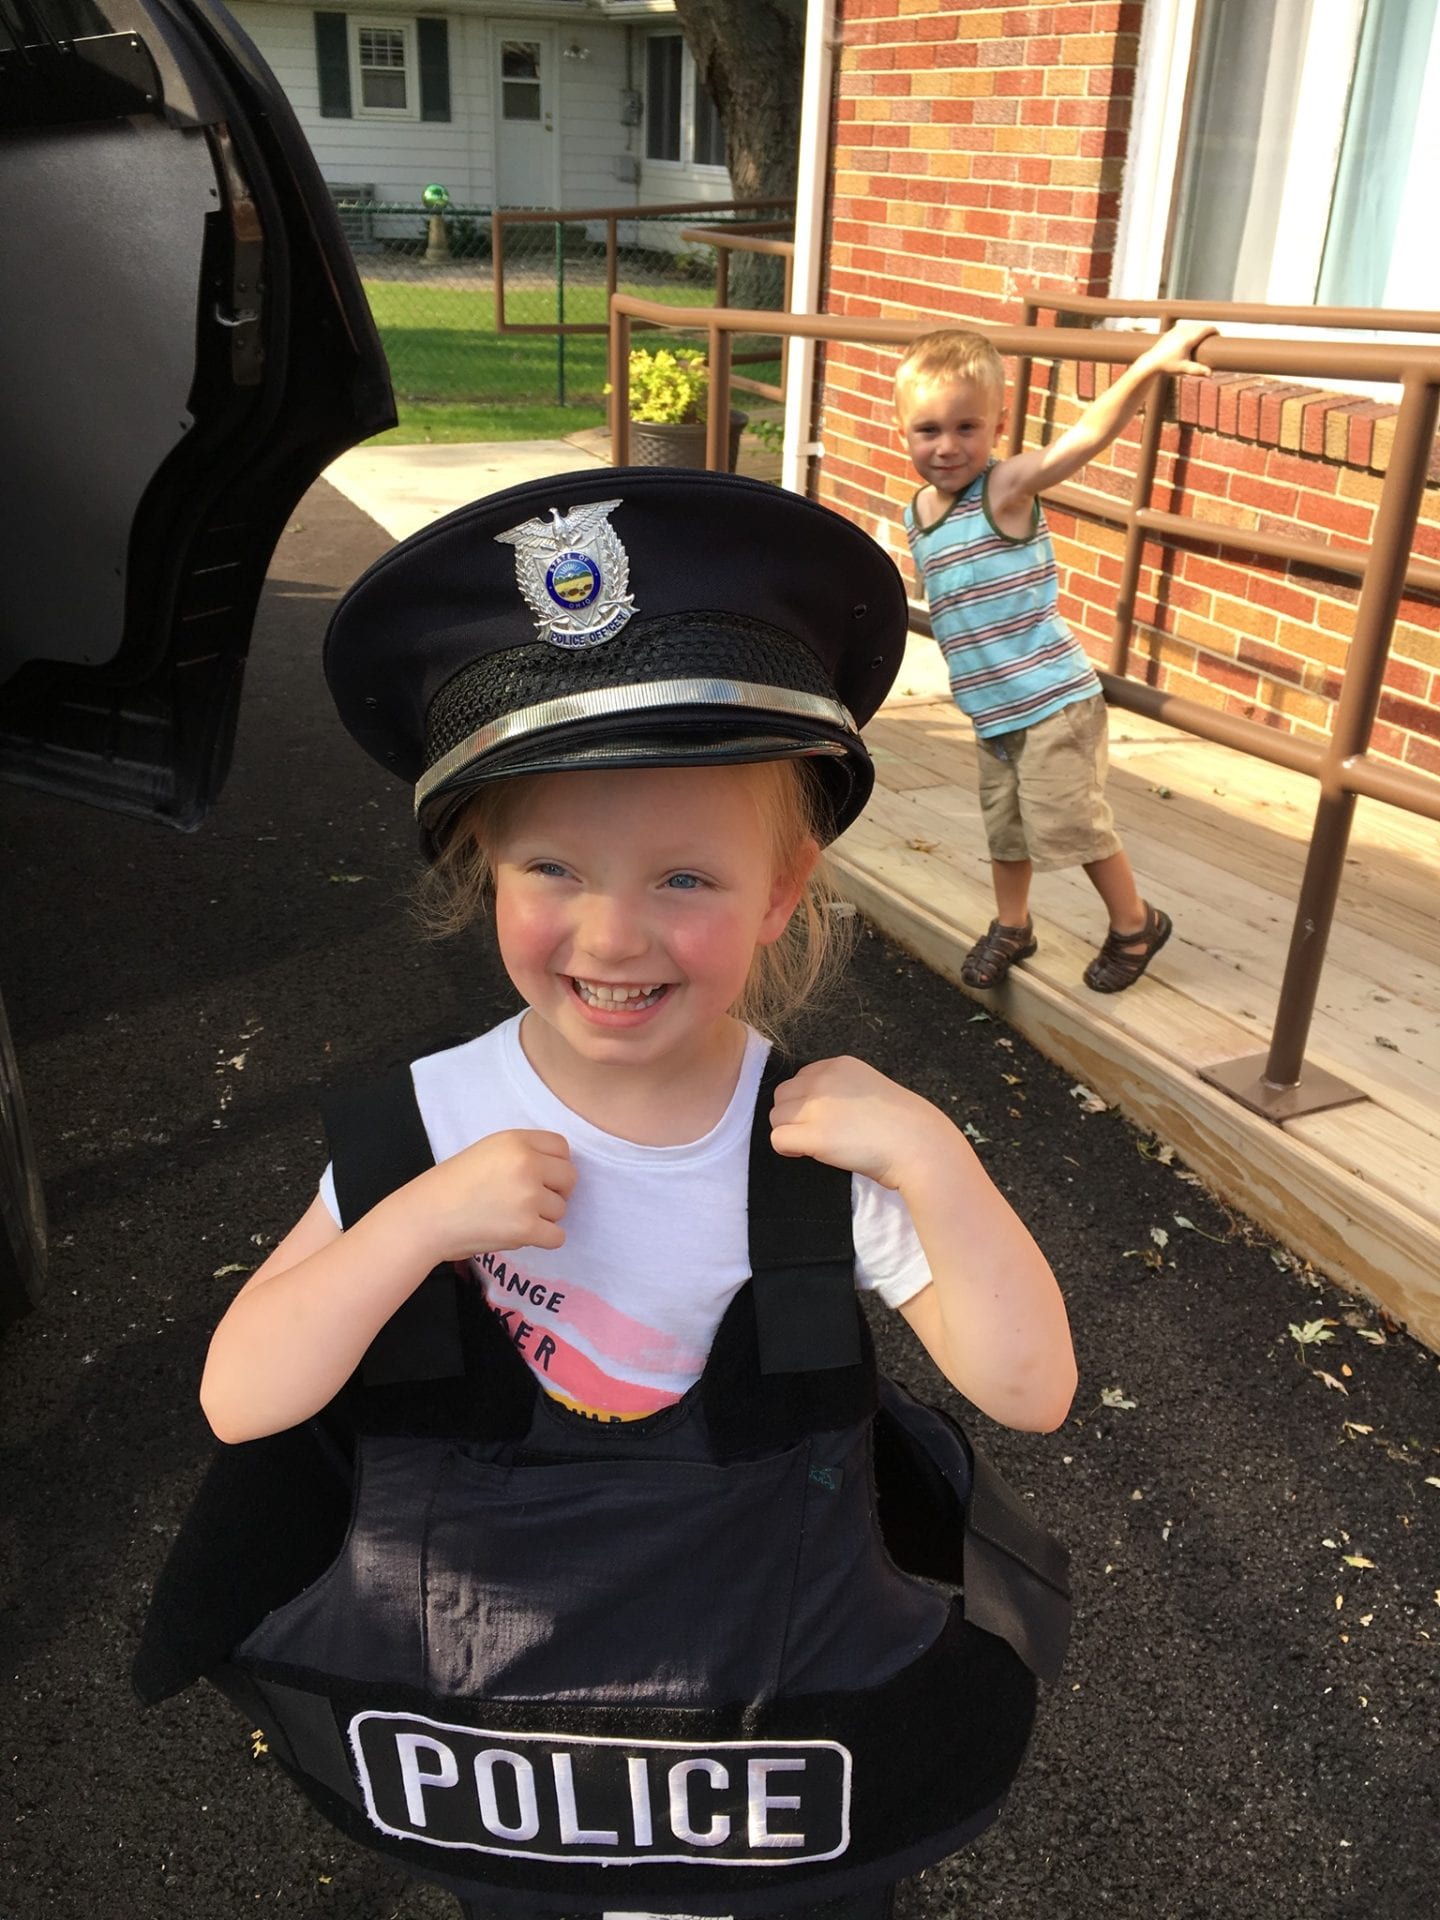 A girl toddler wearing a police vest